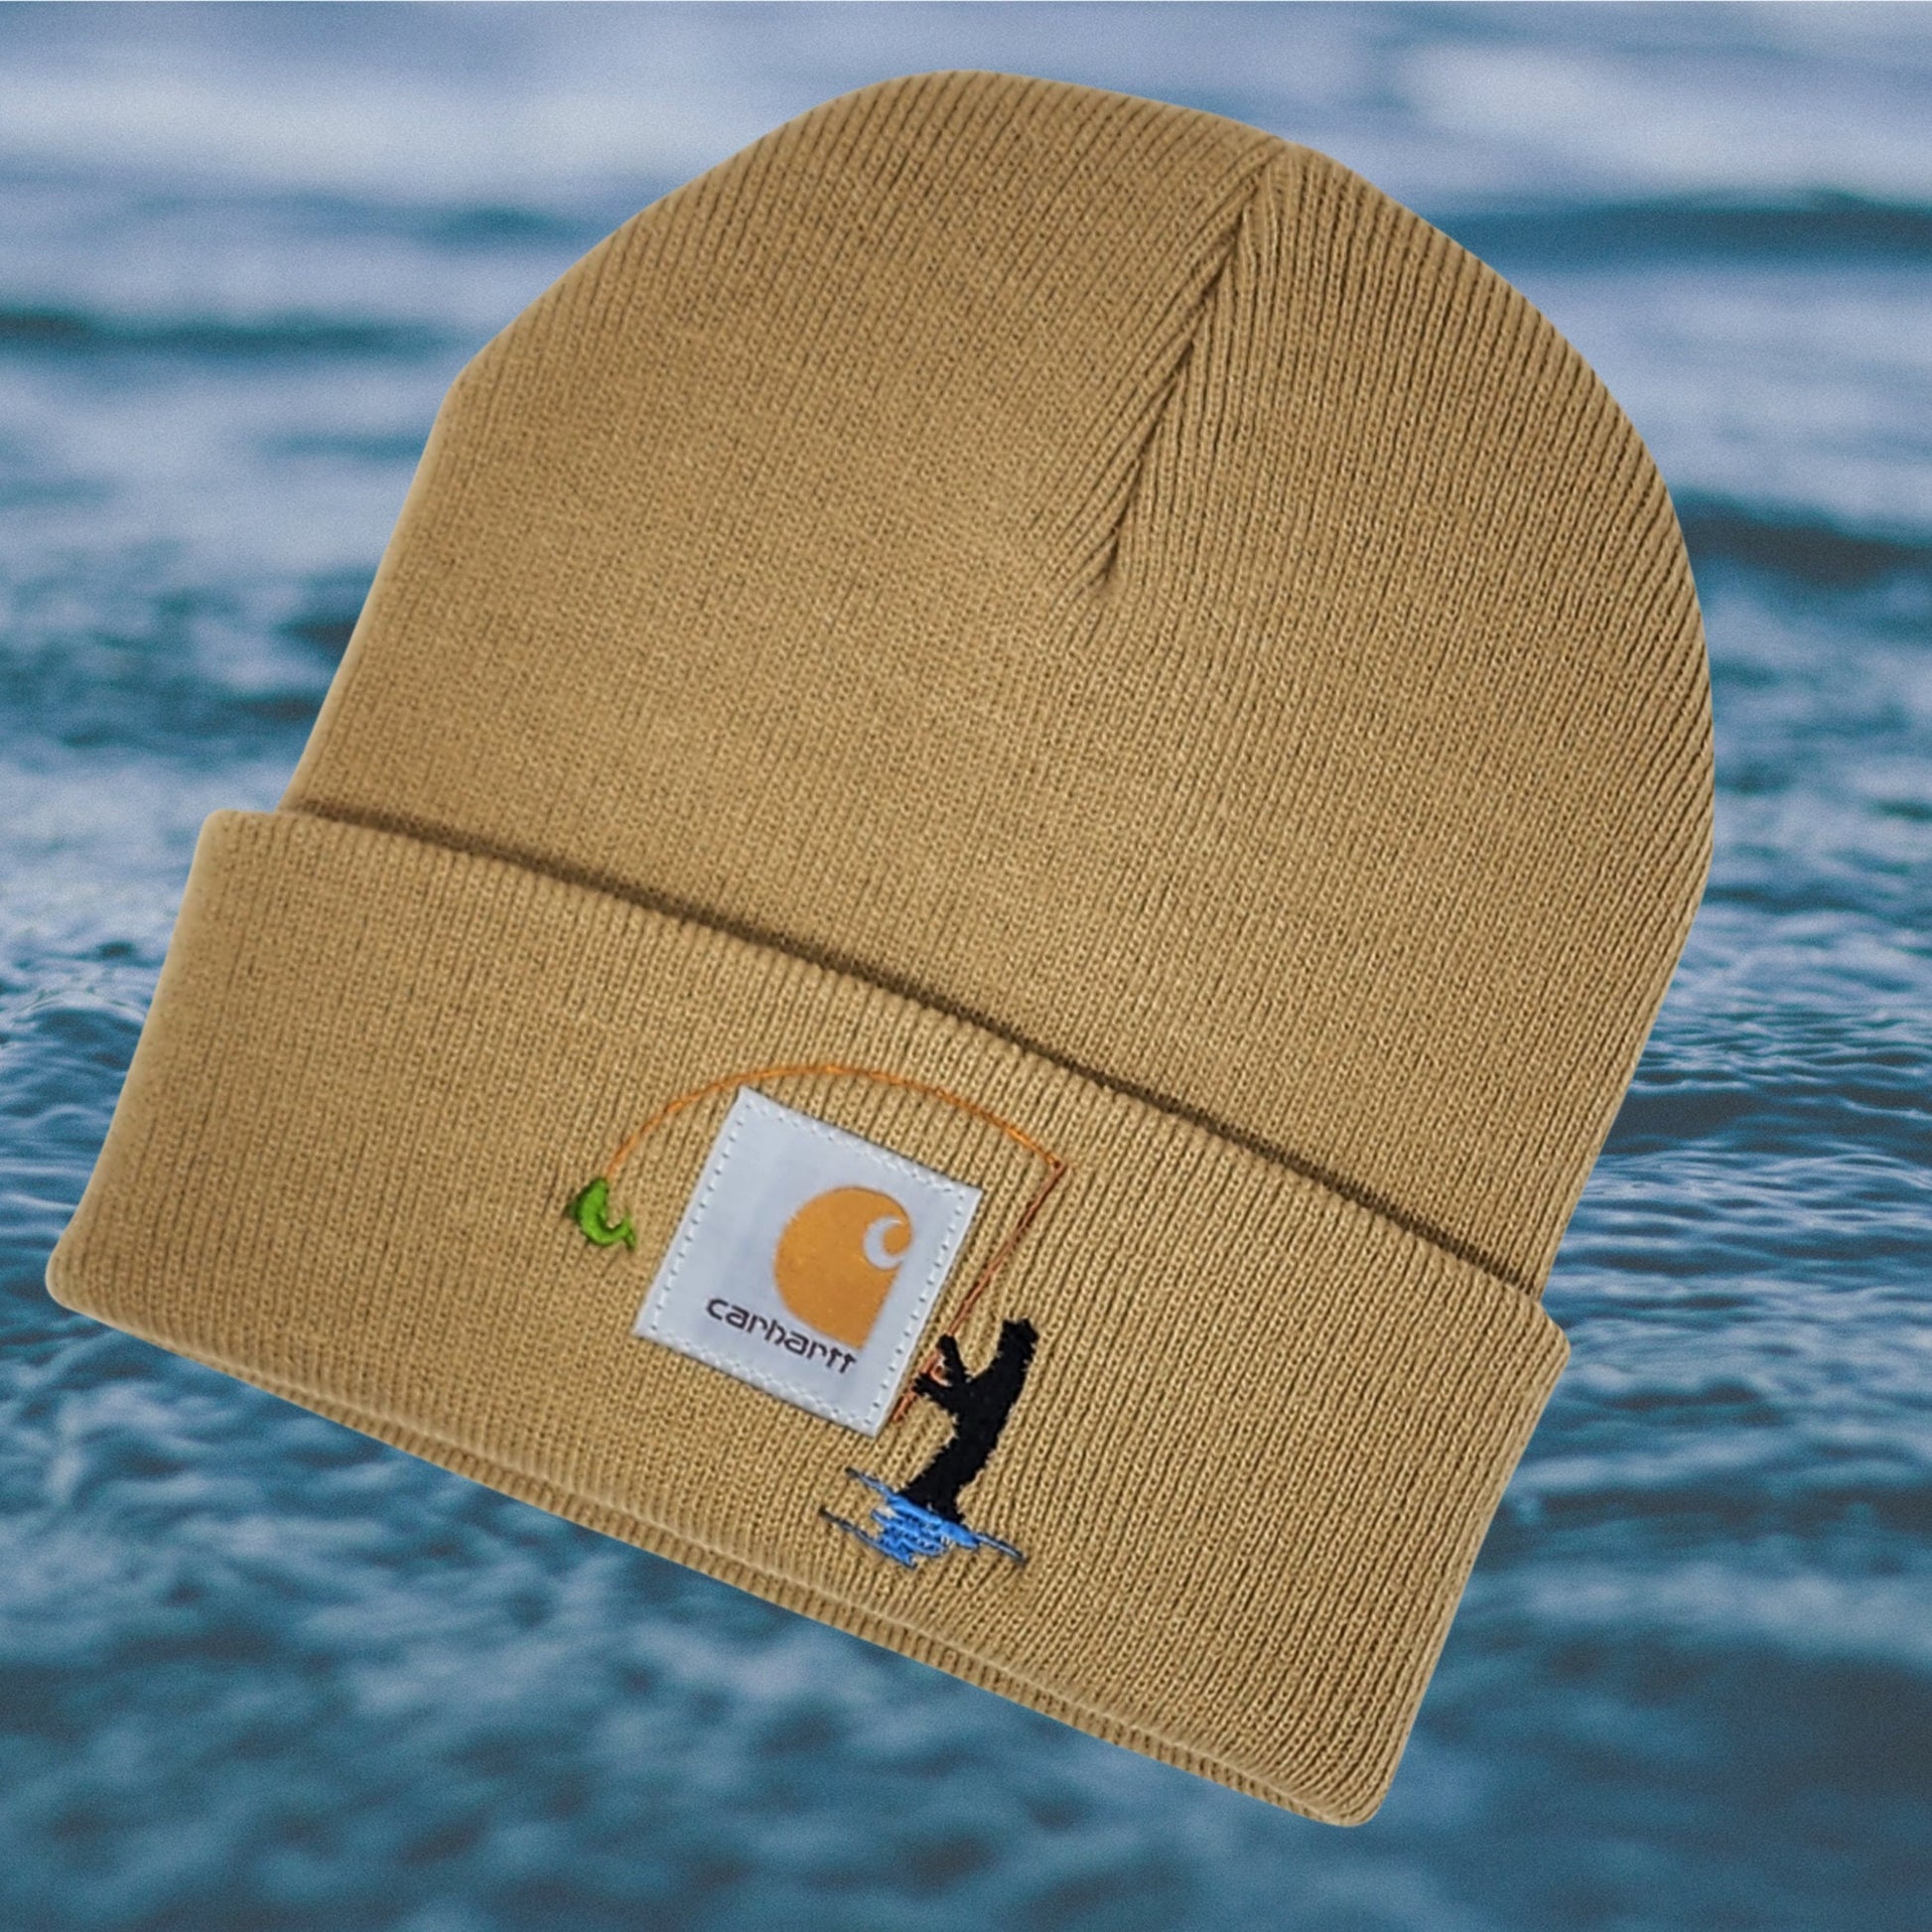 Fisherman Beanie Embroidered Men's Winter Hat | Fly Fishing | Boyfriend Dad Hat Outdoor Sports Hiking Fishing Camping